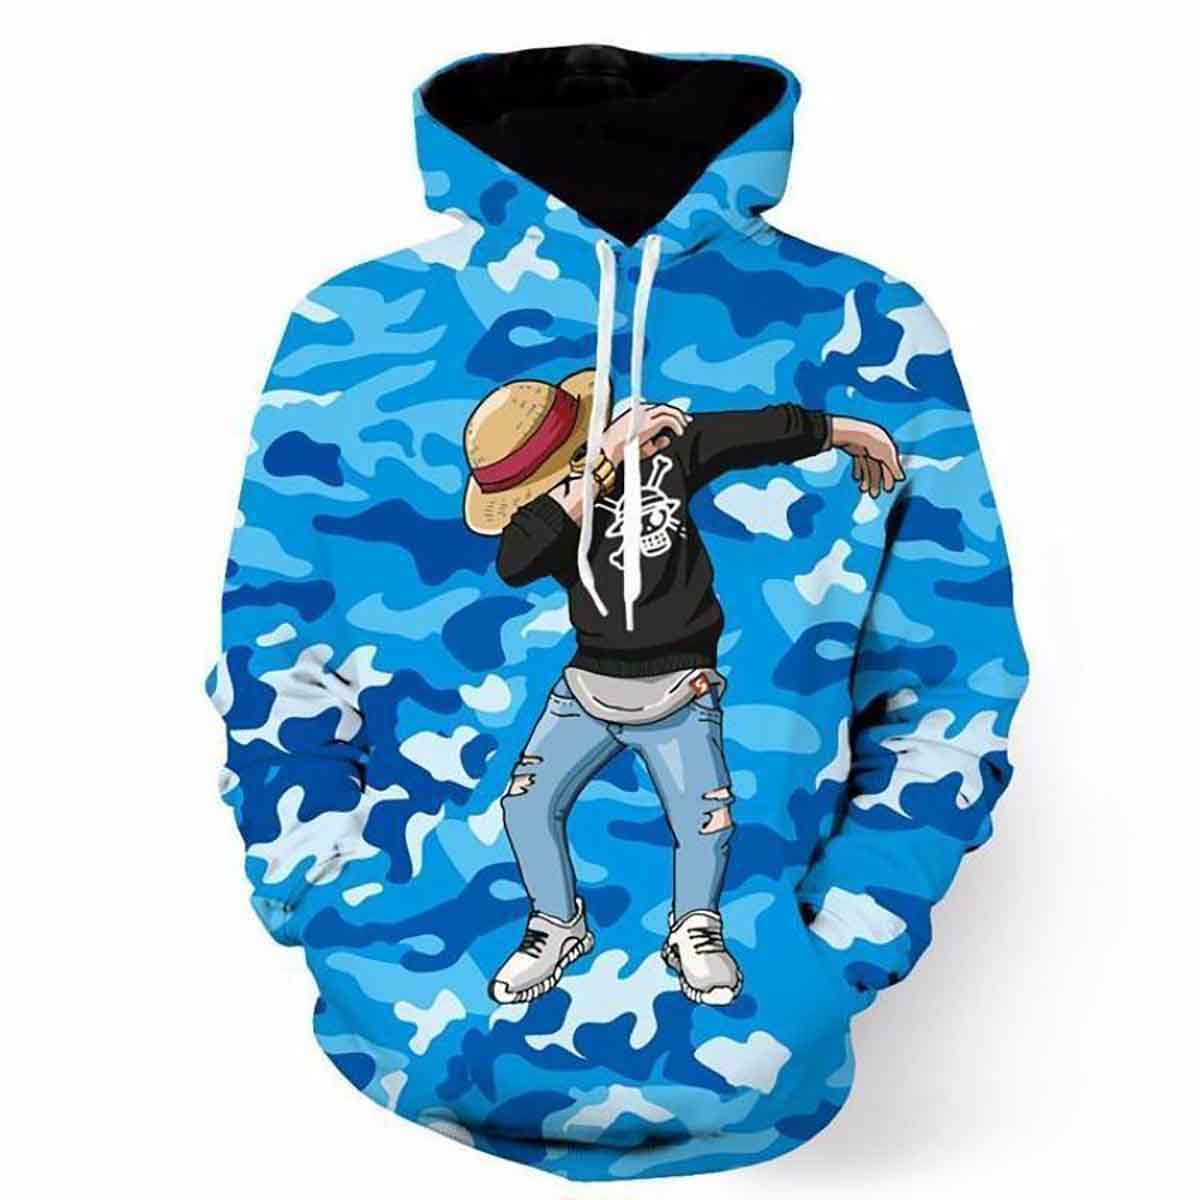 Monkey D.Luffy - One Piece Camo Camouflage Dab Dance Graphic Hd 3d Aop Hoodie